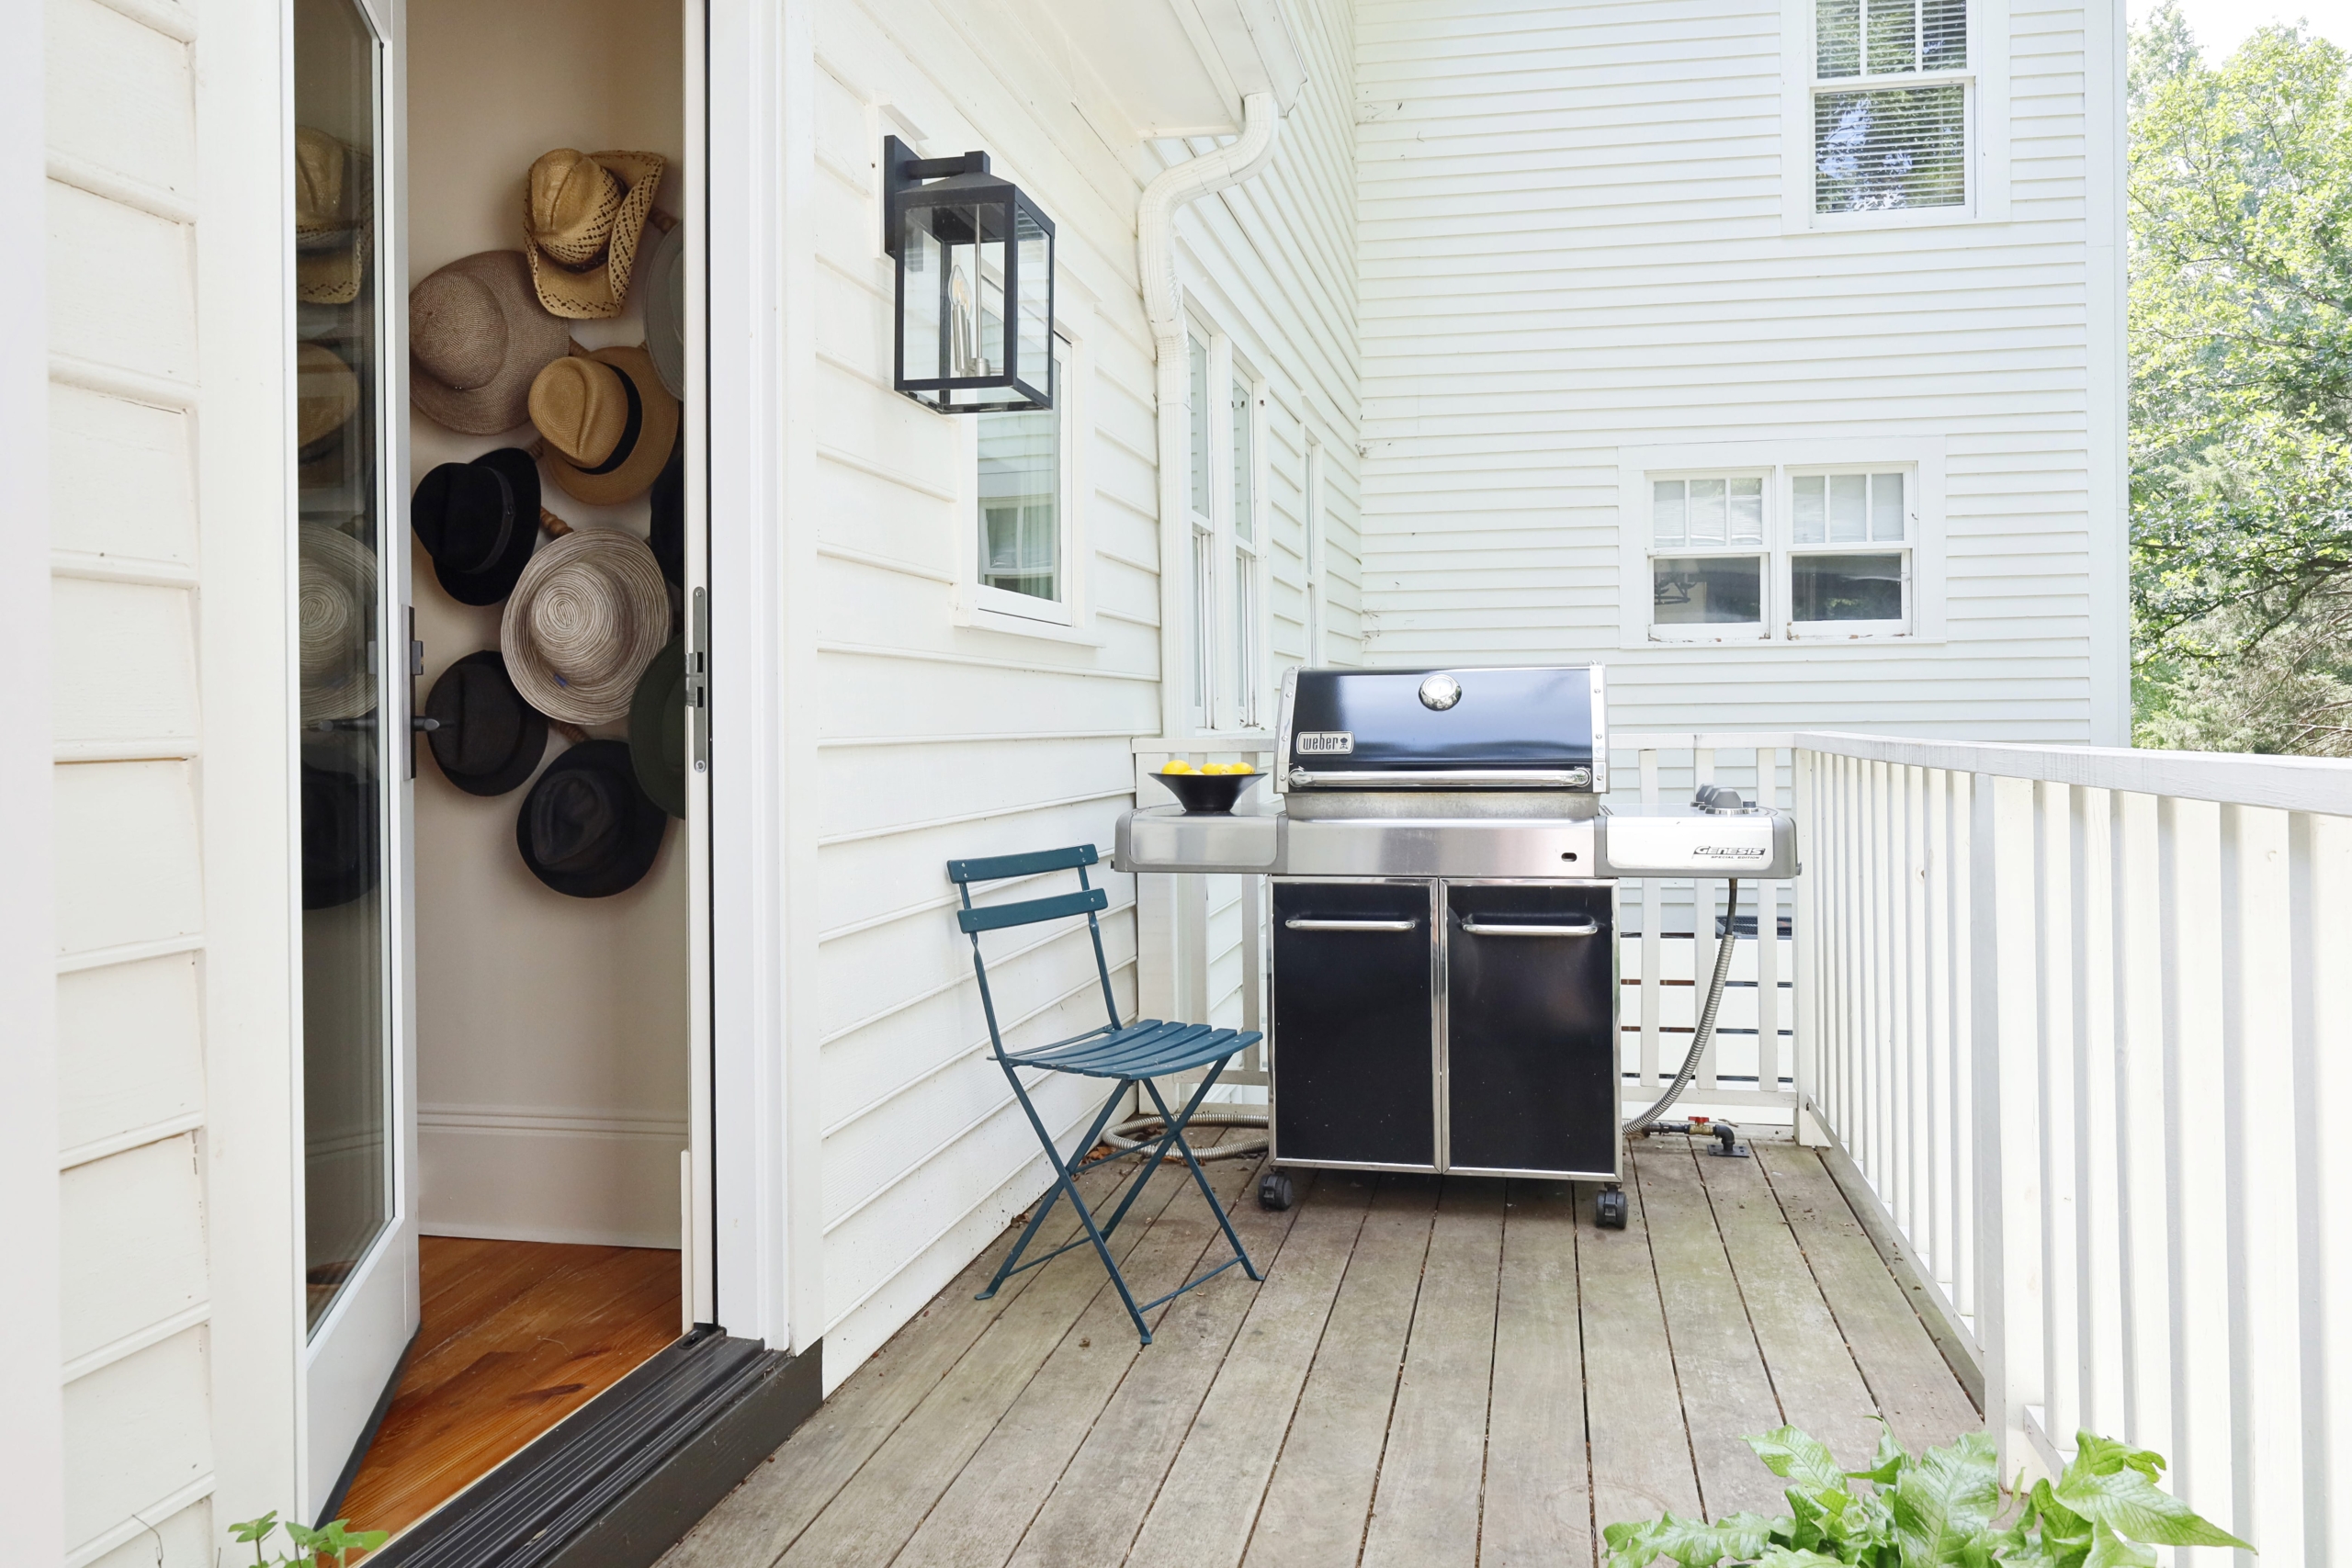 A small deck off the primary suite for grilling, lounging and admiring the surrounding nature